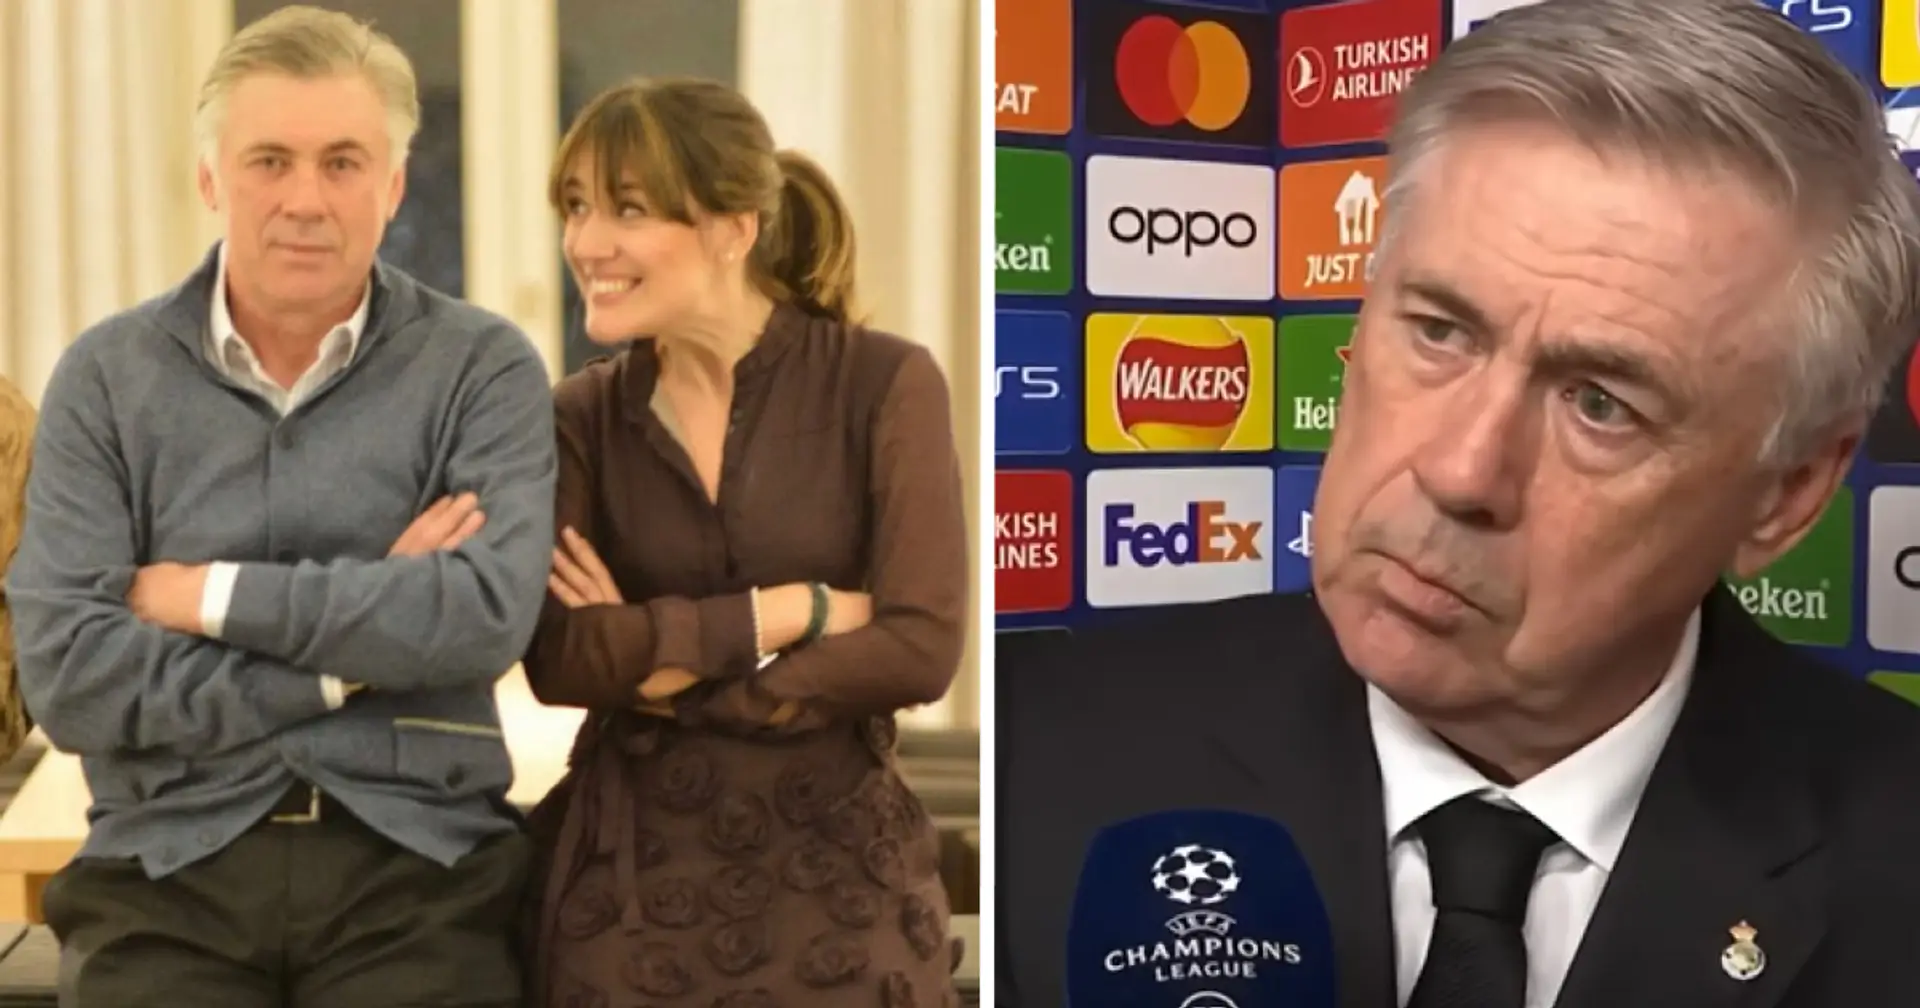 'My 8-year-old son can ask better questions': Ancelotti's daughter slams Spanish media